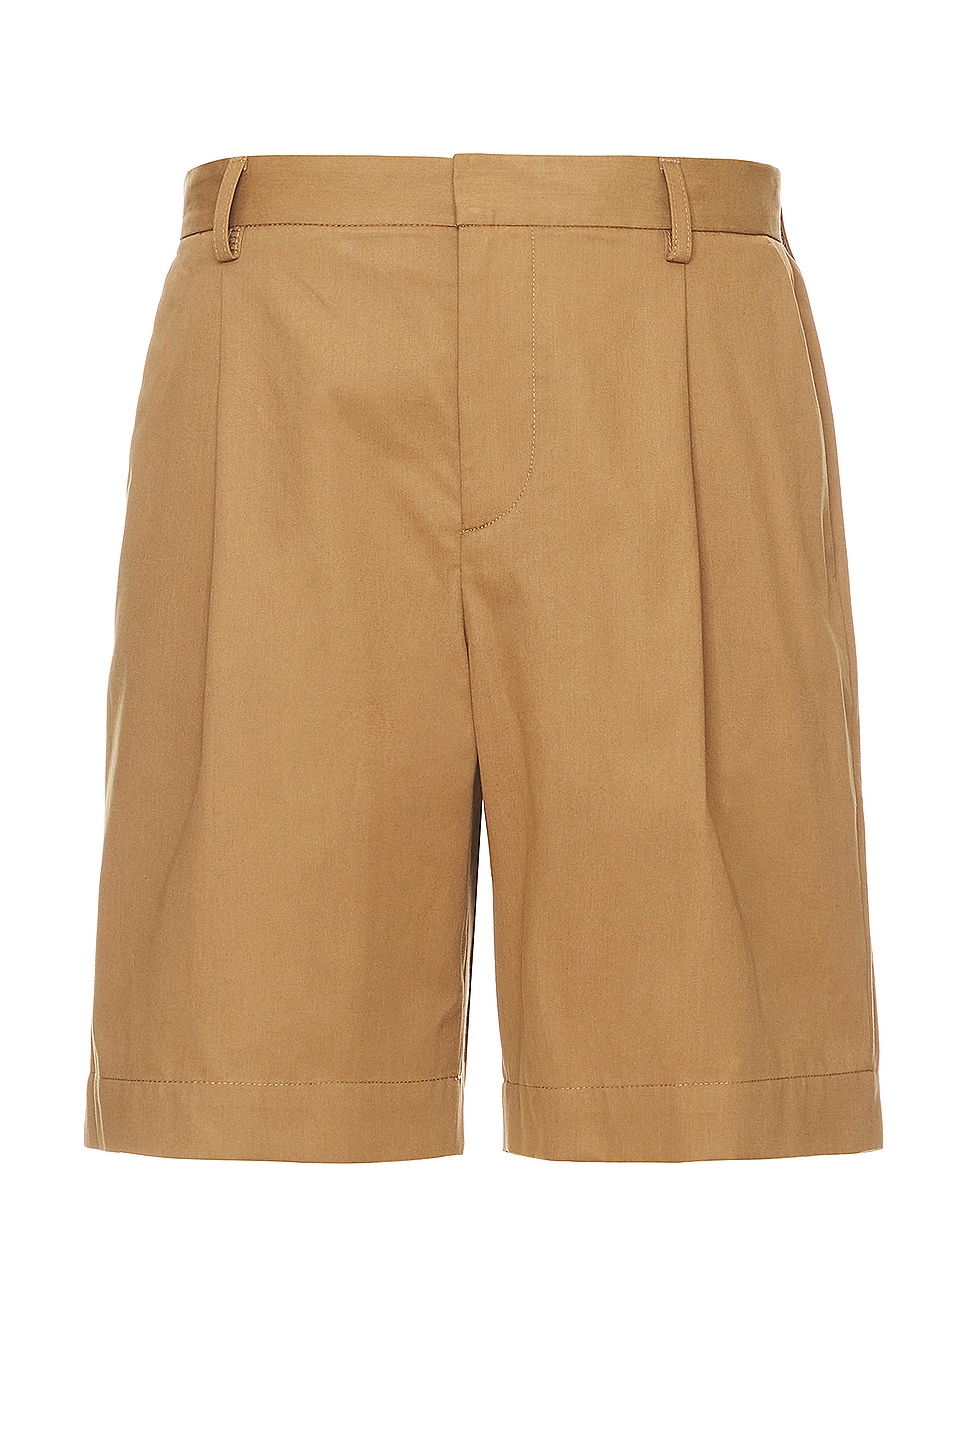 Image 1 of A.P.C. Short Crew in Camel